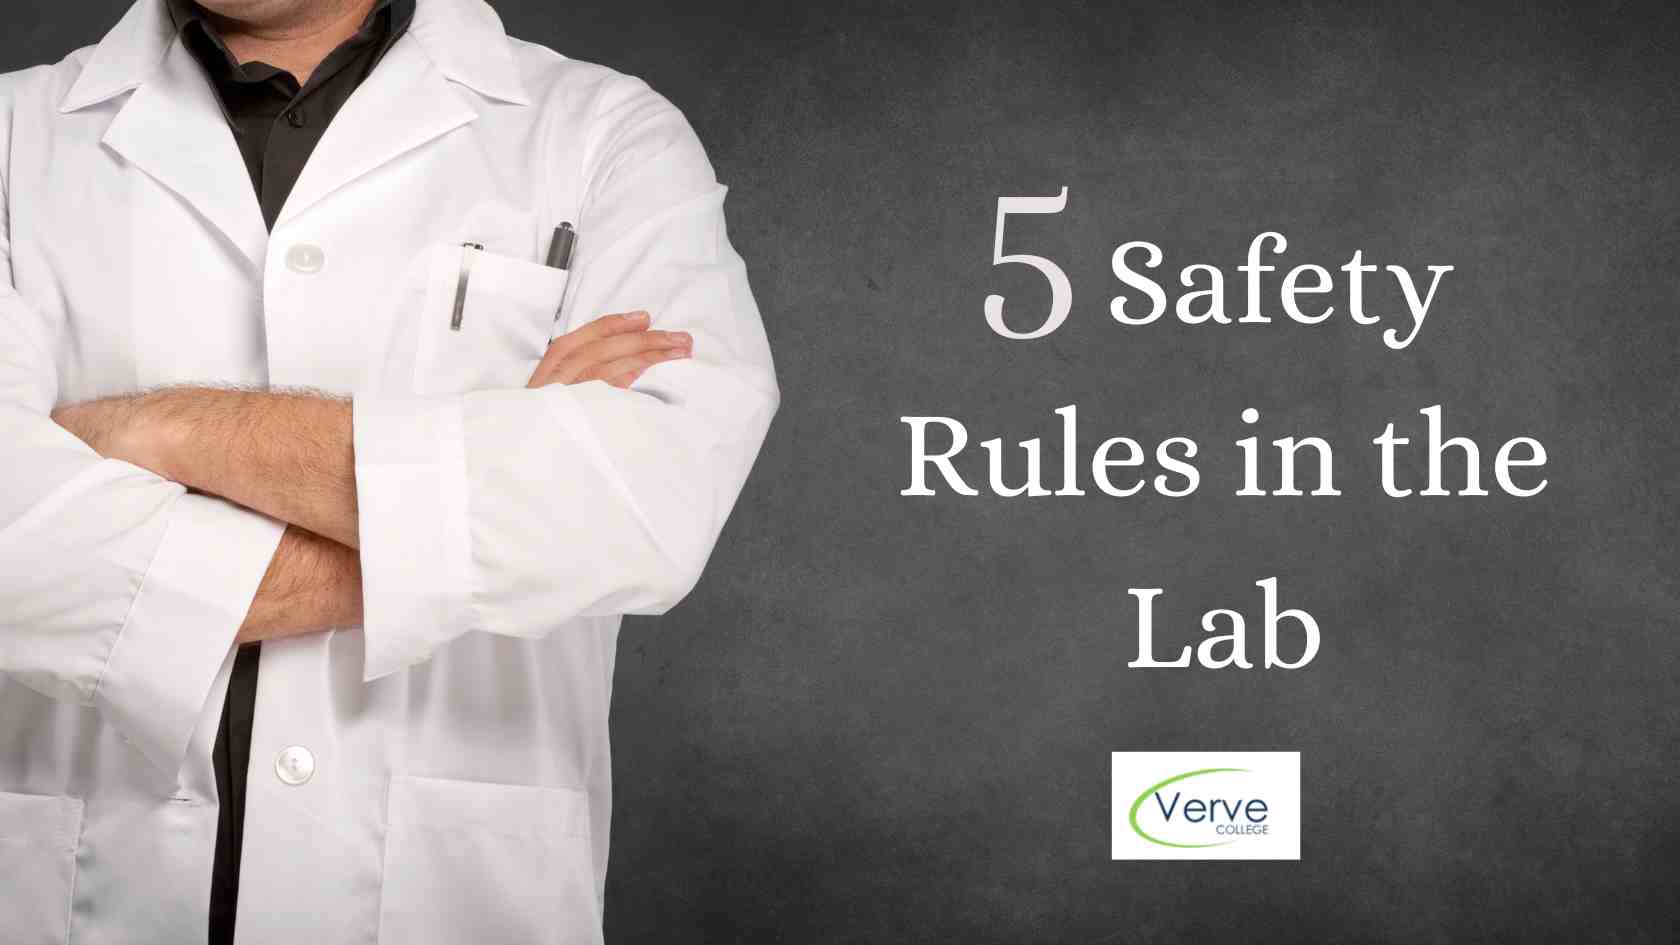 Follow These 5 Safety Rules in the Lab